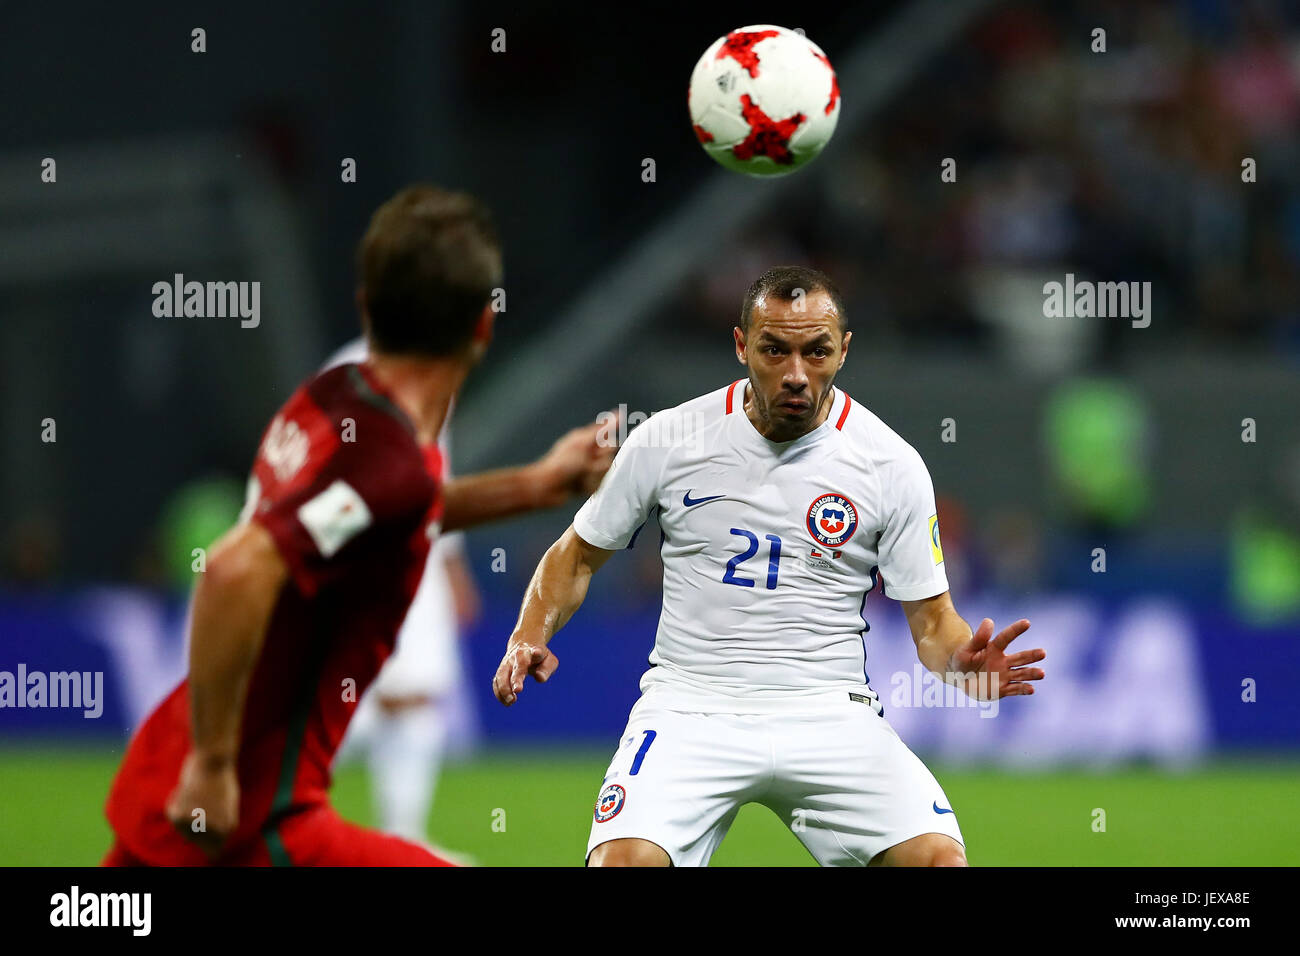 KAZAN, RT - 28.06.2017: PORTUGAL VS CHILE - Marcelo Diaz of Chile during a match between Portugal and Chile valid for the semifinals of the Confederations Cup 2017, on Wednesday (28), held at Kazan Arena Stadium in Kazan, Russia. (Photo: Heuler Andrey/DiaEsportivo/Fotoarena) Stock Photo